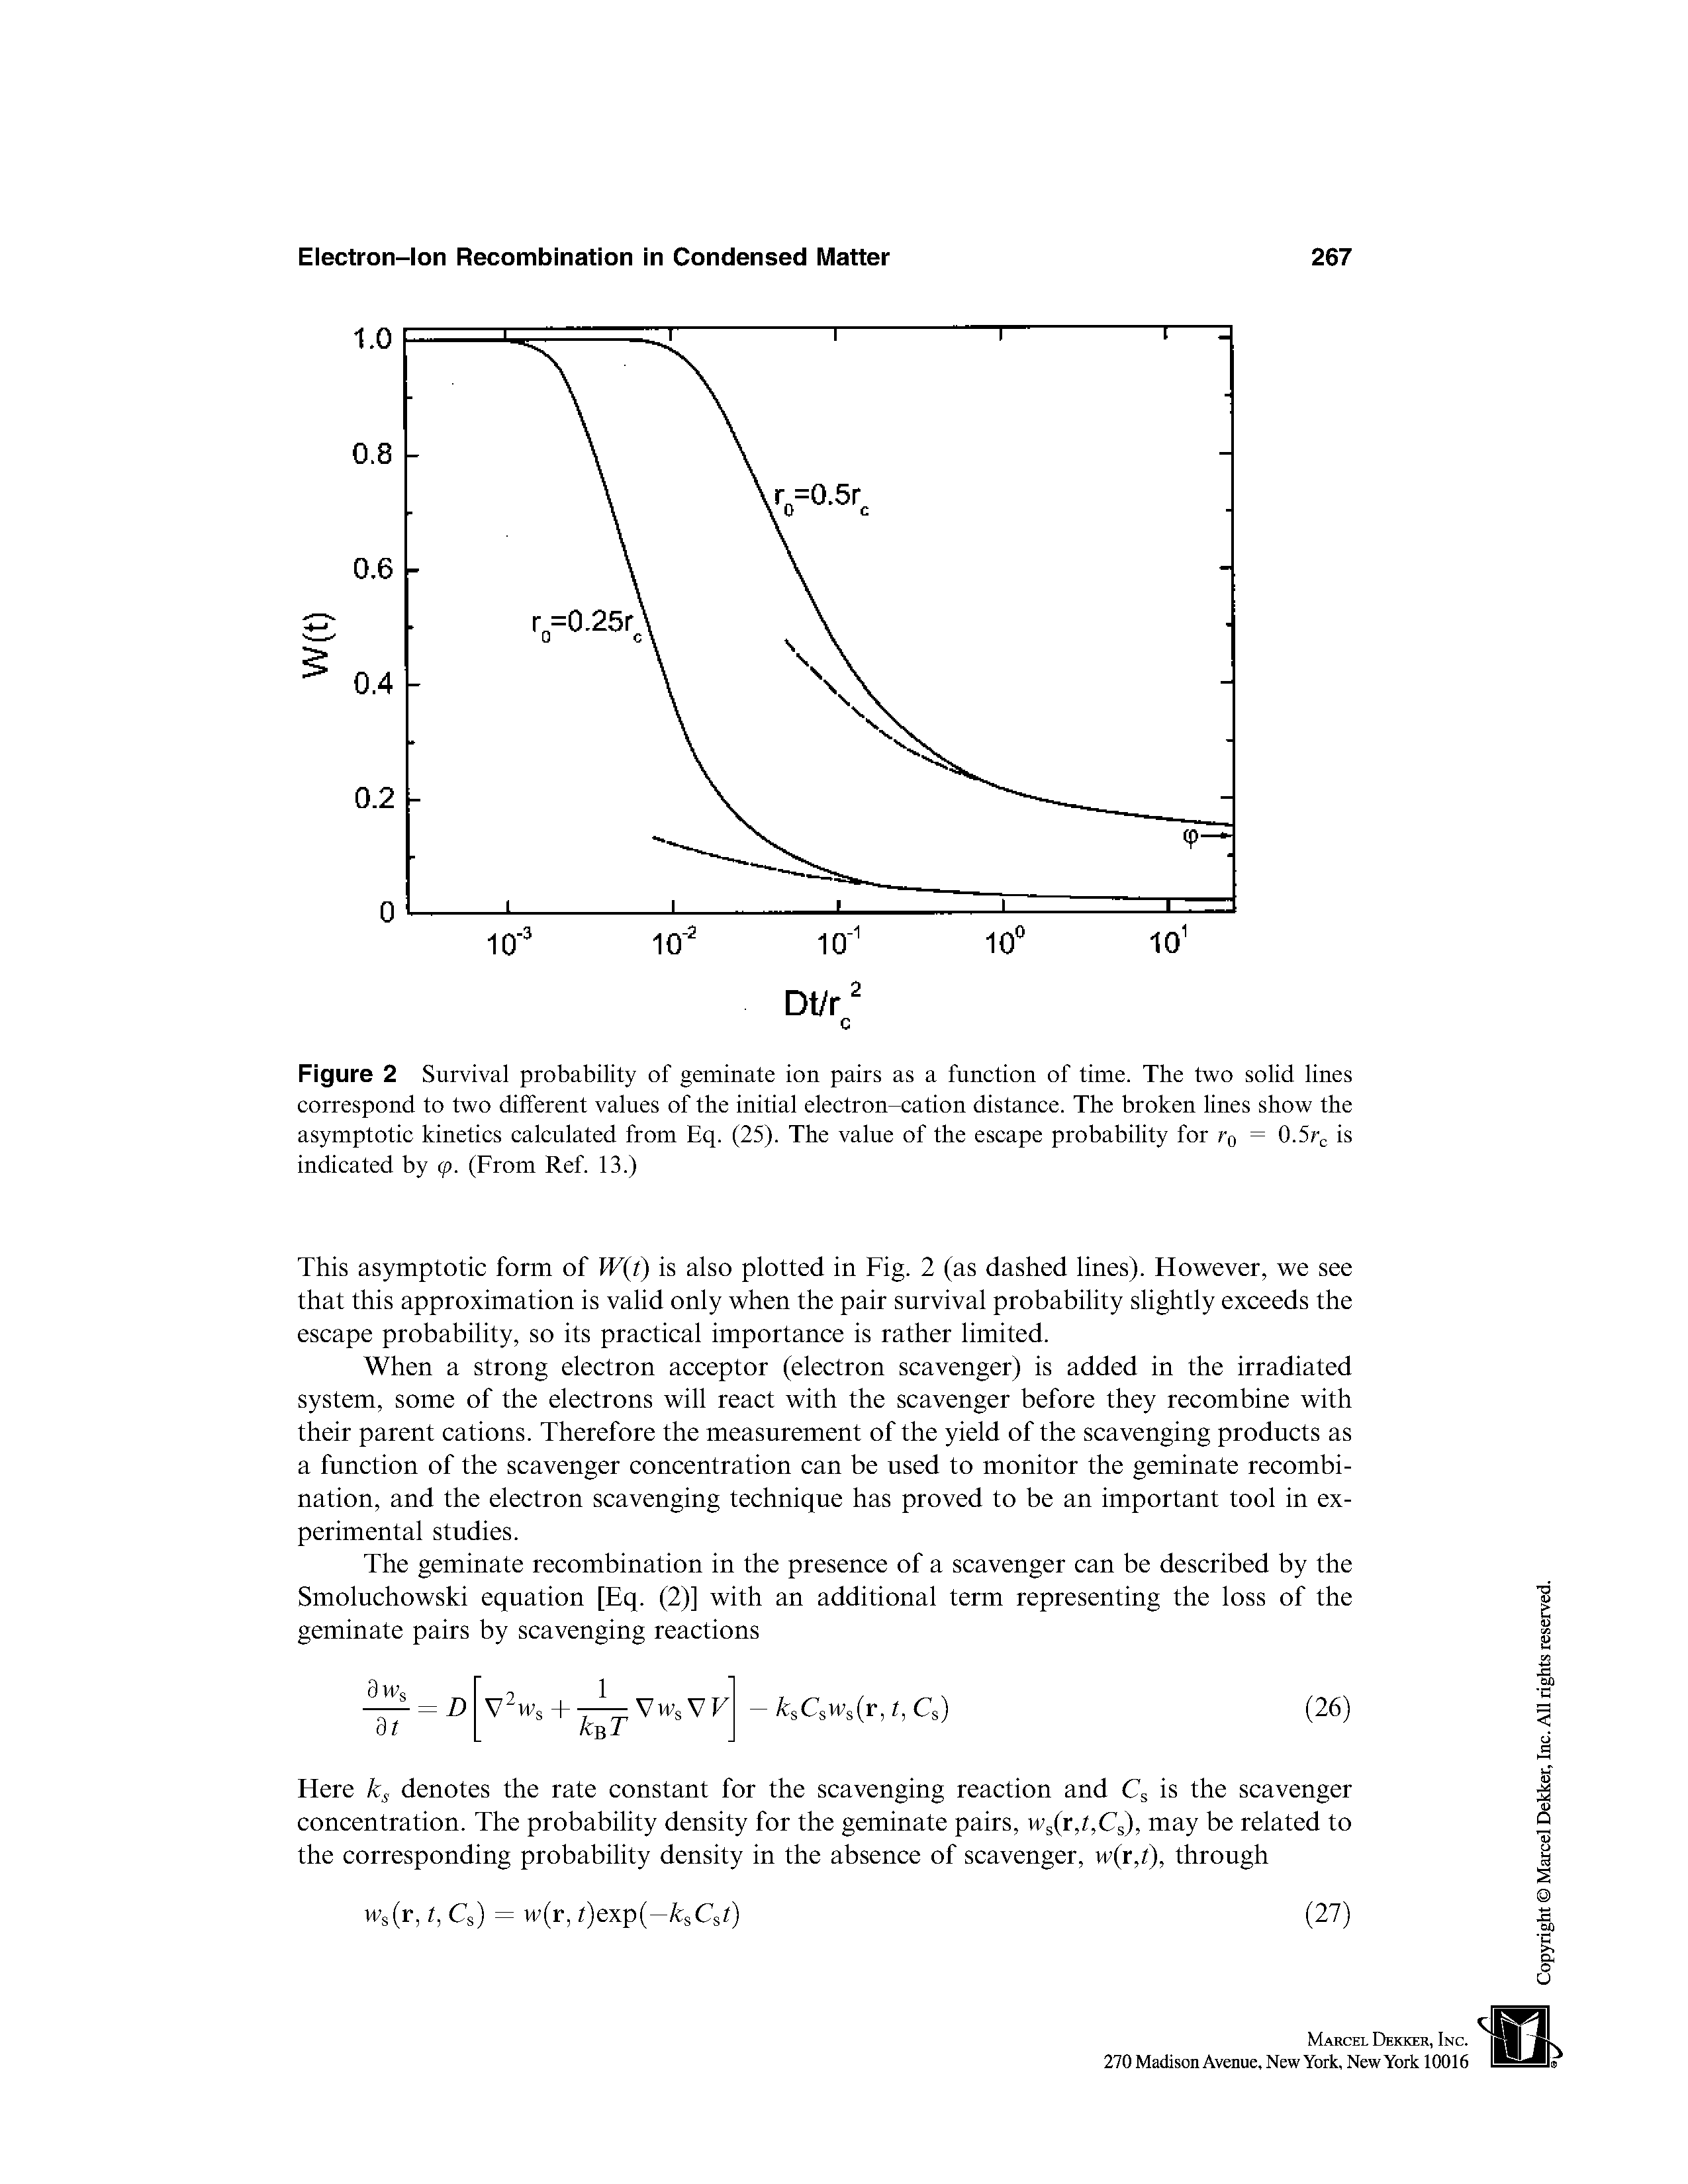 Figure 2 Survival probability of geminate ion pairs as a function of time. The two solid lines correspond to two different values of the initial electron-cation distance. The broken lines show the asymptotic kinetics calculated from Eq. (25). The value of the escape probability for Tq = O.Sr is indicated by <p. (From Ref. 13.)...